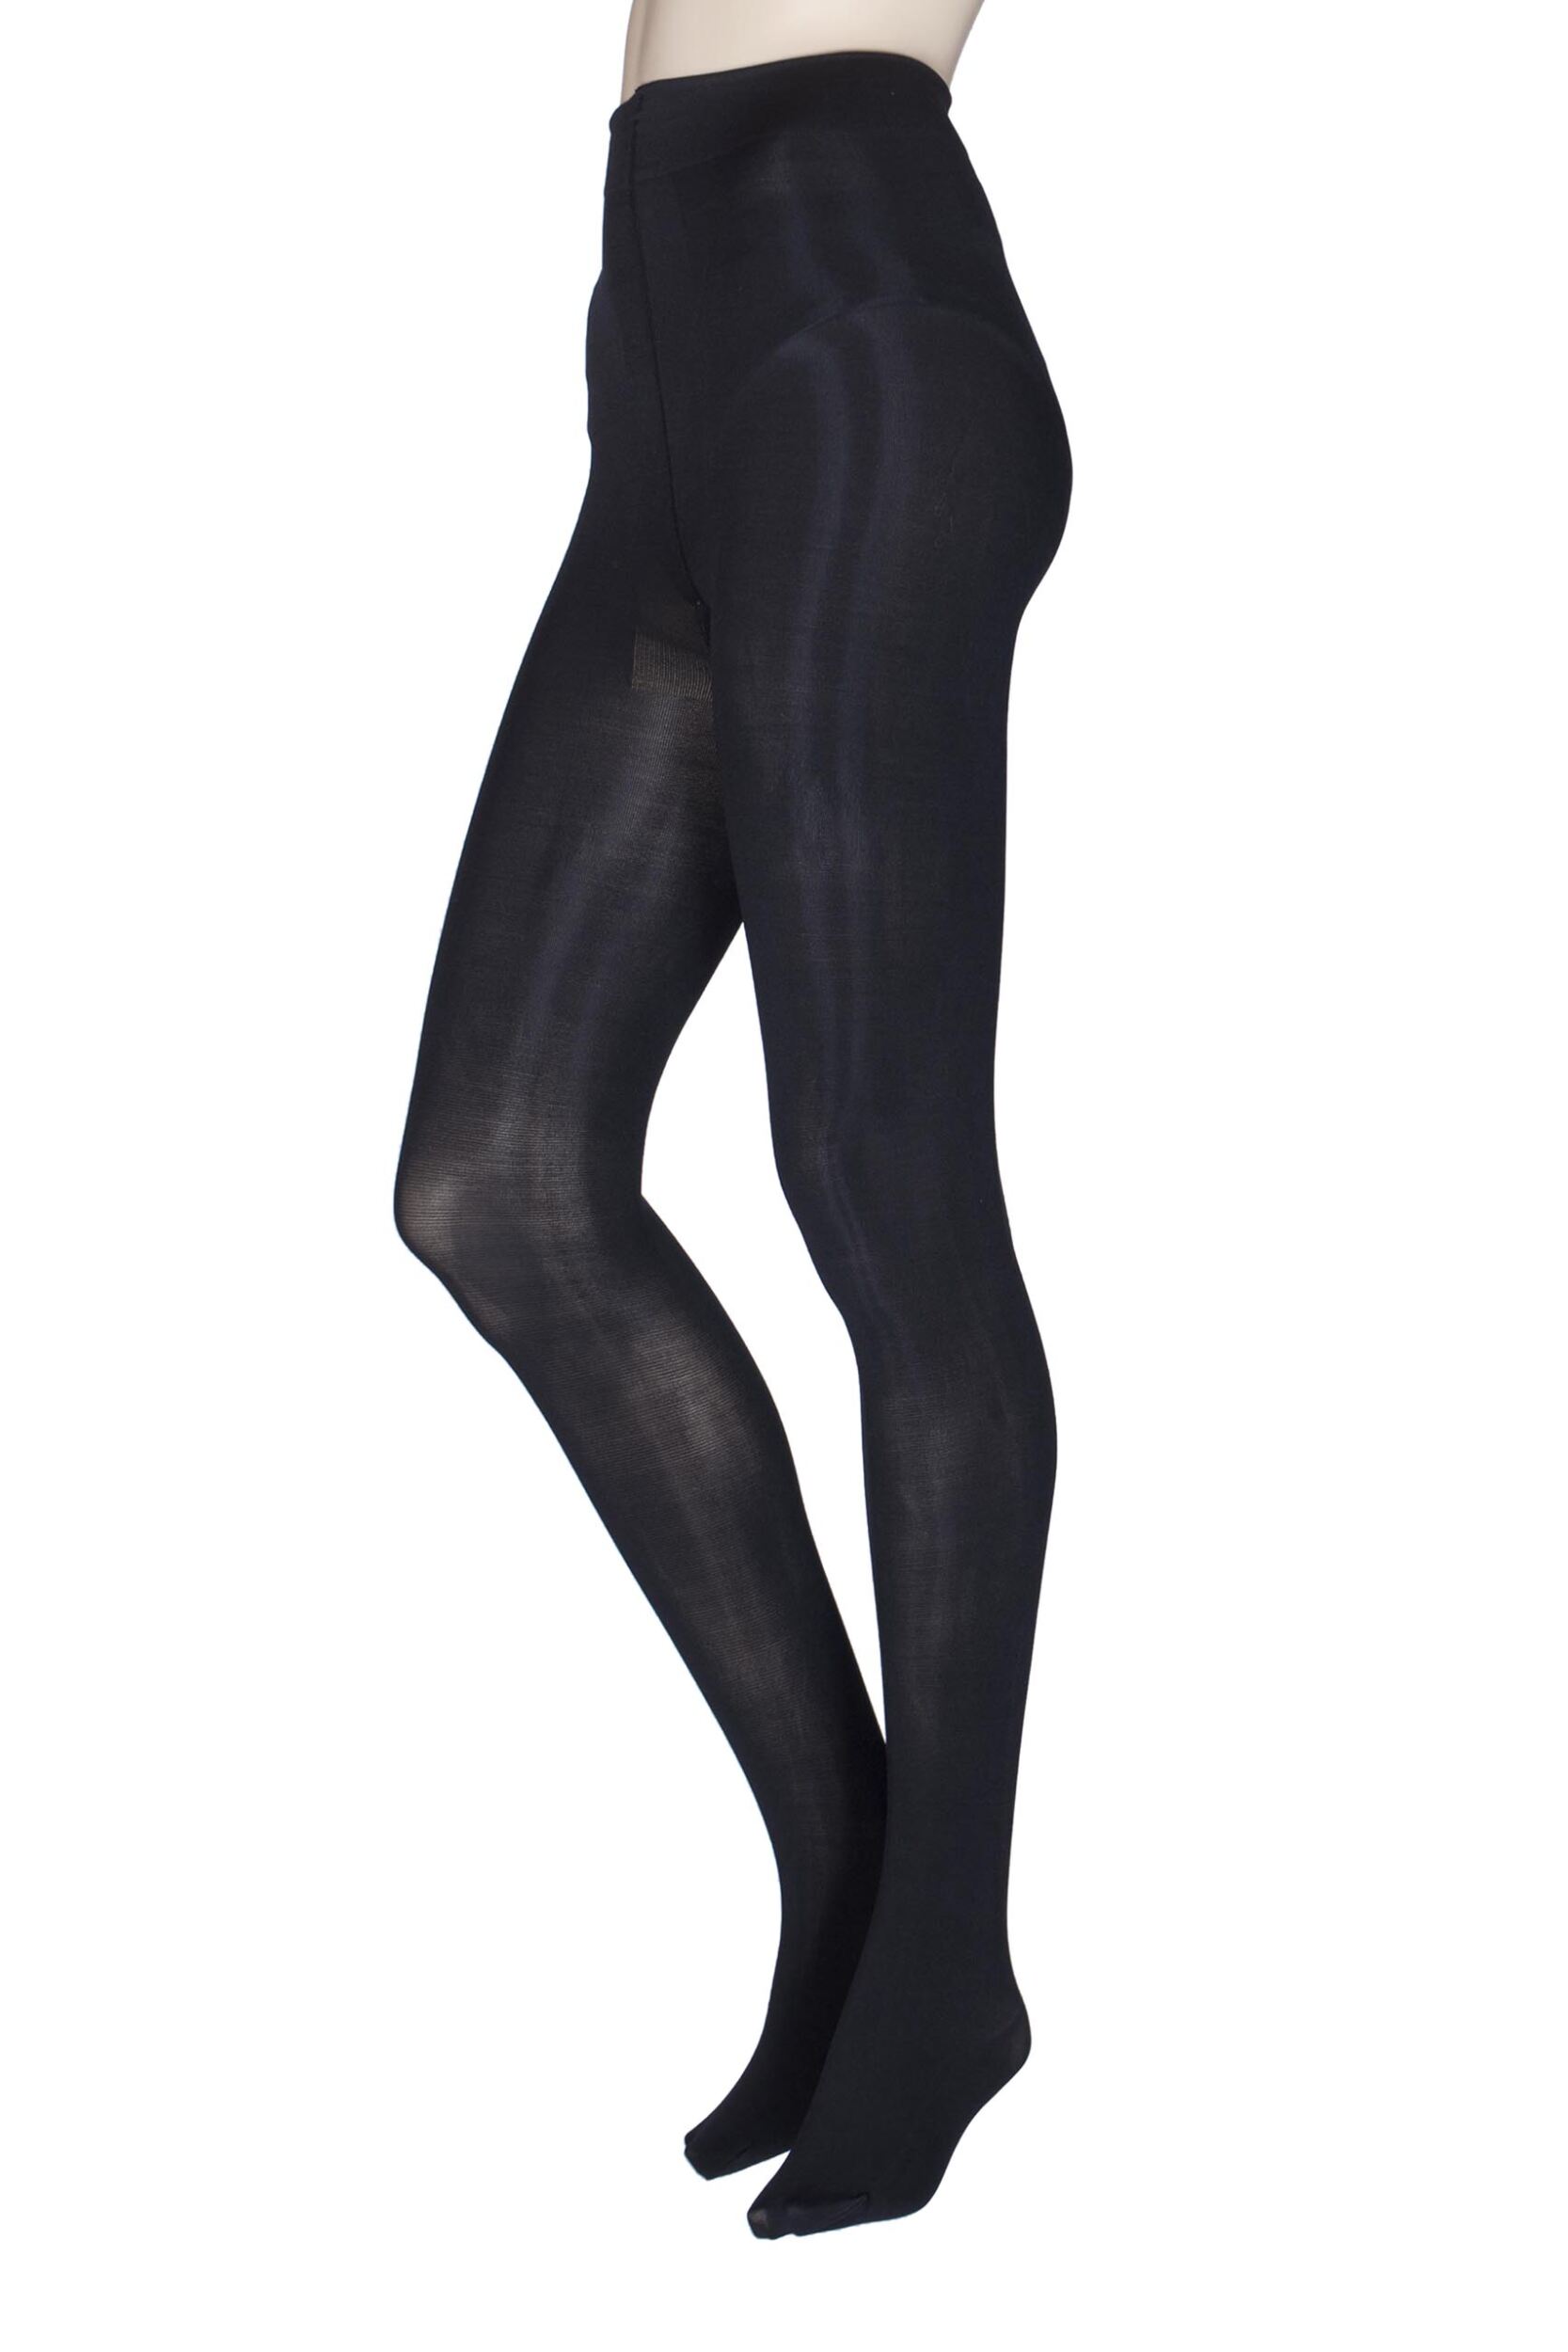 1 Pair Black Sara Recycled Nylon Opaque Tights Ladies Extra Large - Thought